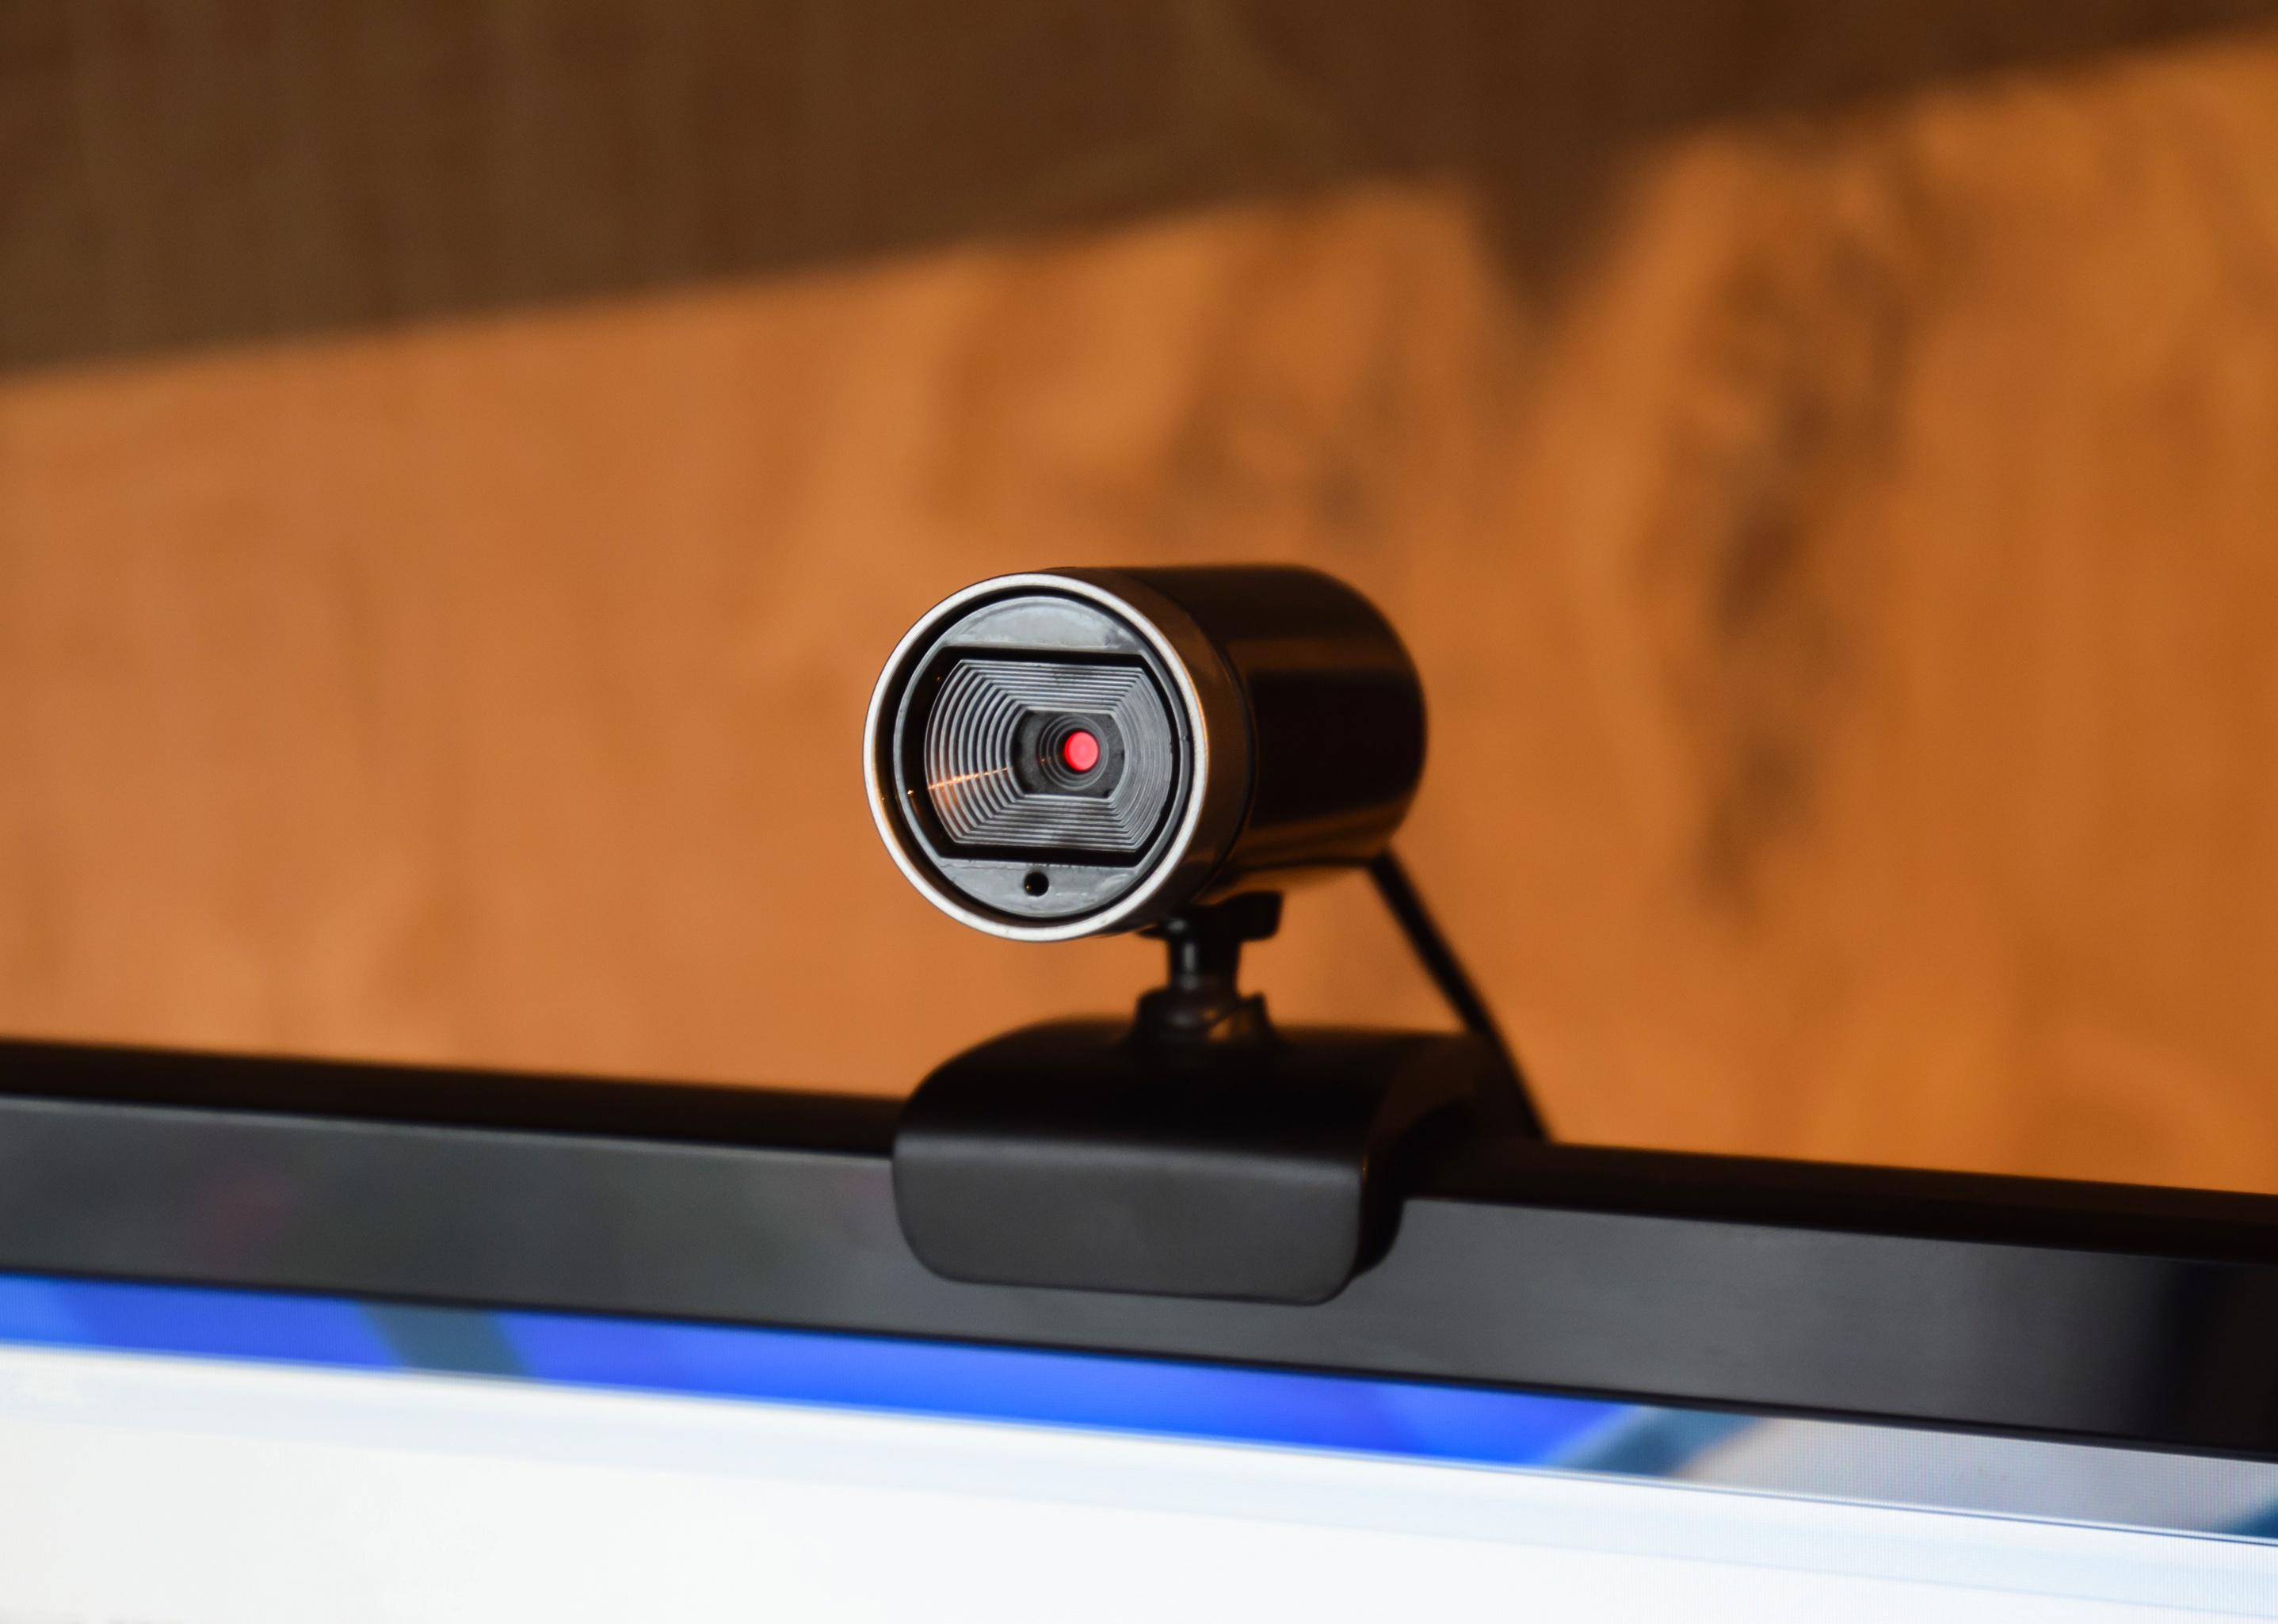 Web camera attached to a monitor